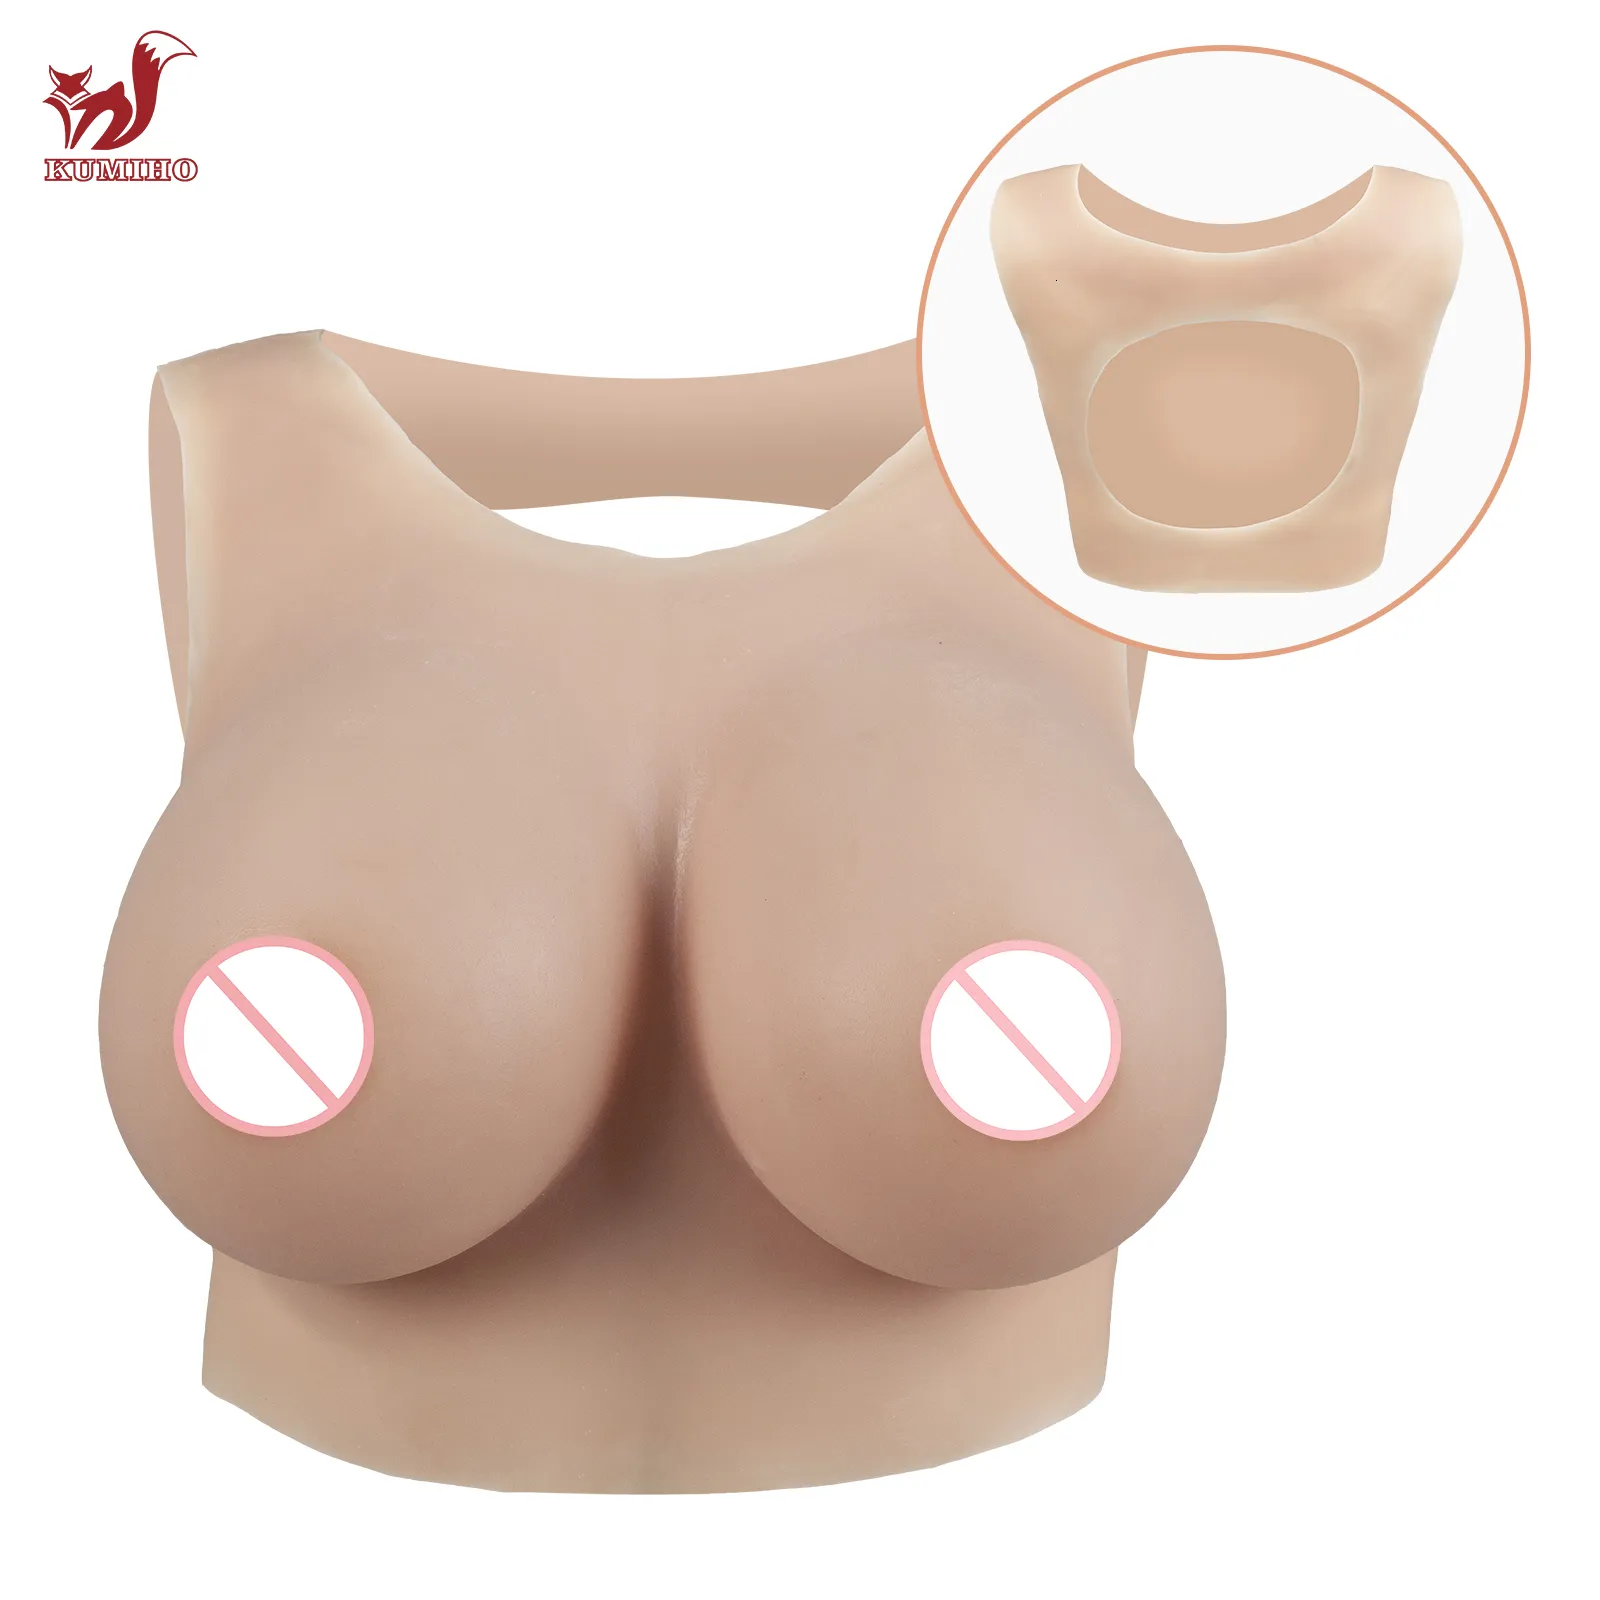 Breast Form Realistic Silicone Breast Forms Kumiho Round Neck Hollow Drag Queen Fake Boobs Transgender Cosplay Fake Silicone Breast Forms 230703